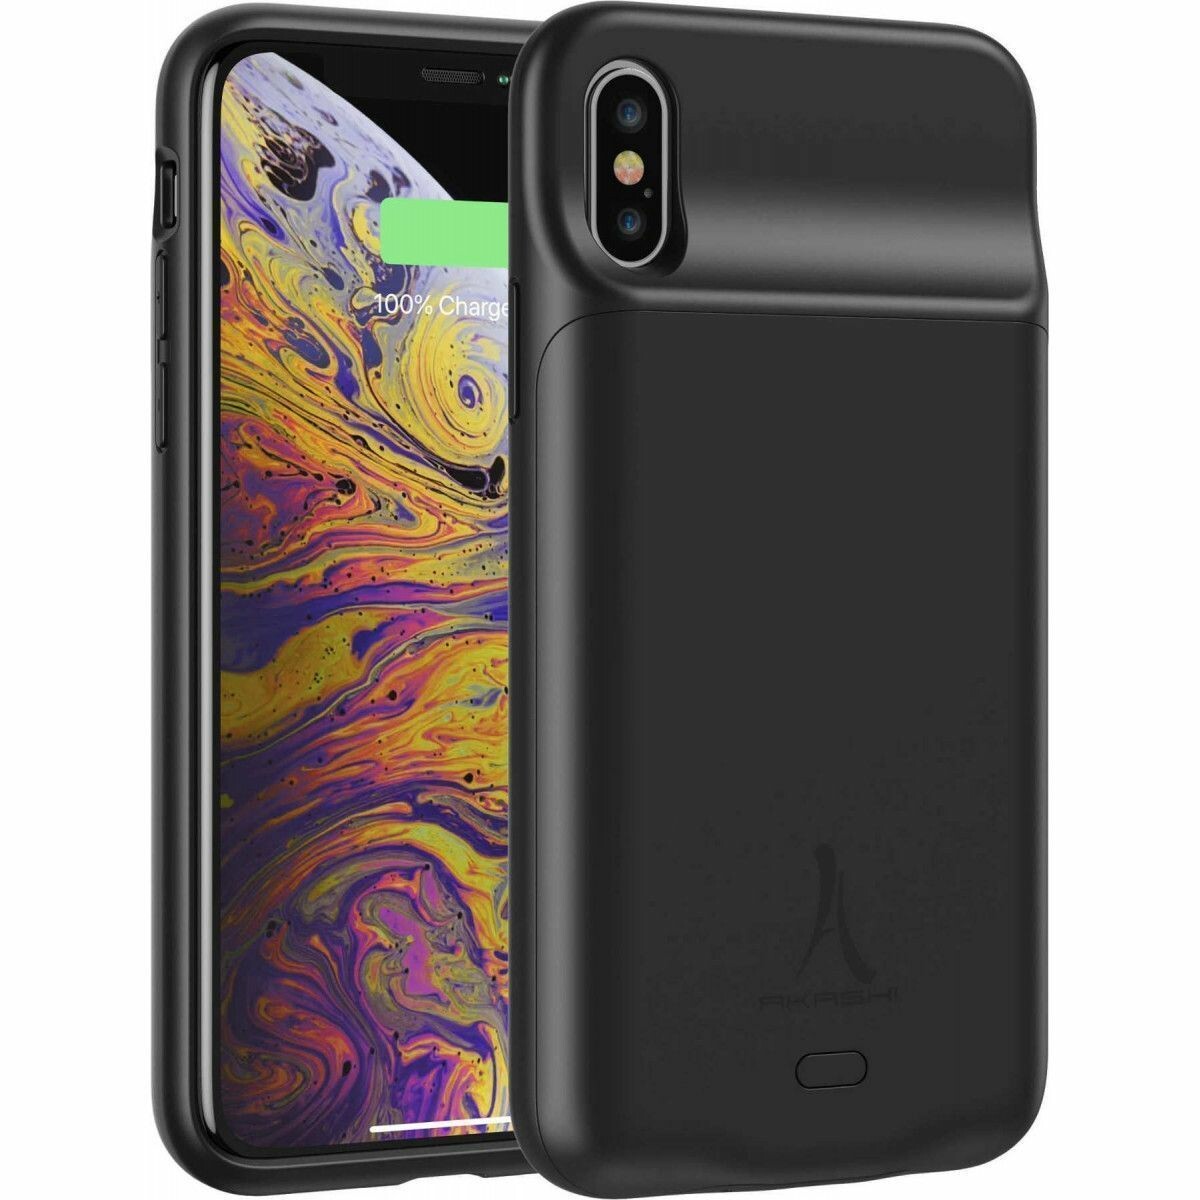 Coque batterie pour iPhone X/XS, iPhone X / XR / XS / XS Max